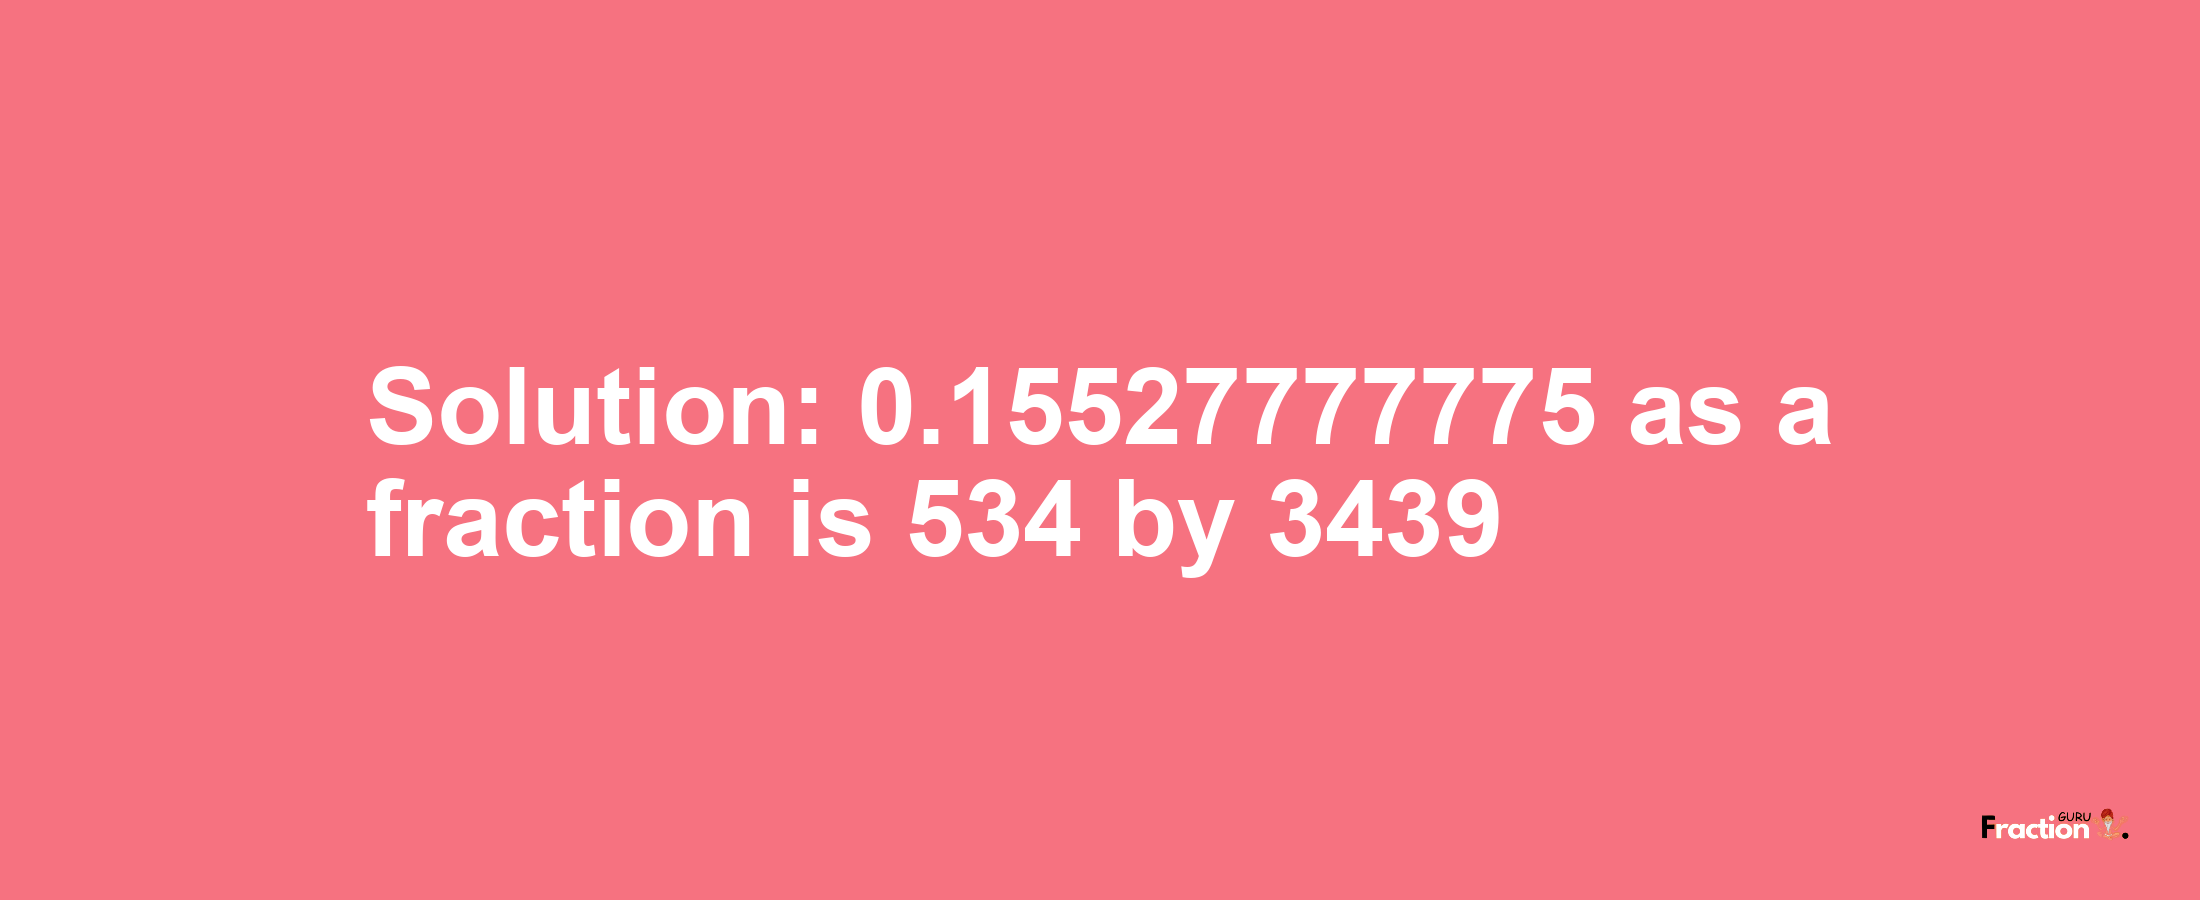 Solution:0.15527777775 as a fraction is 534/3439